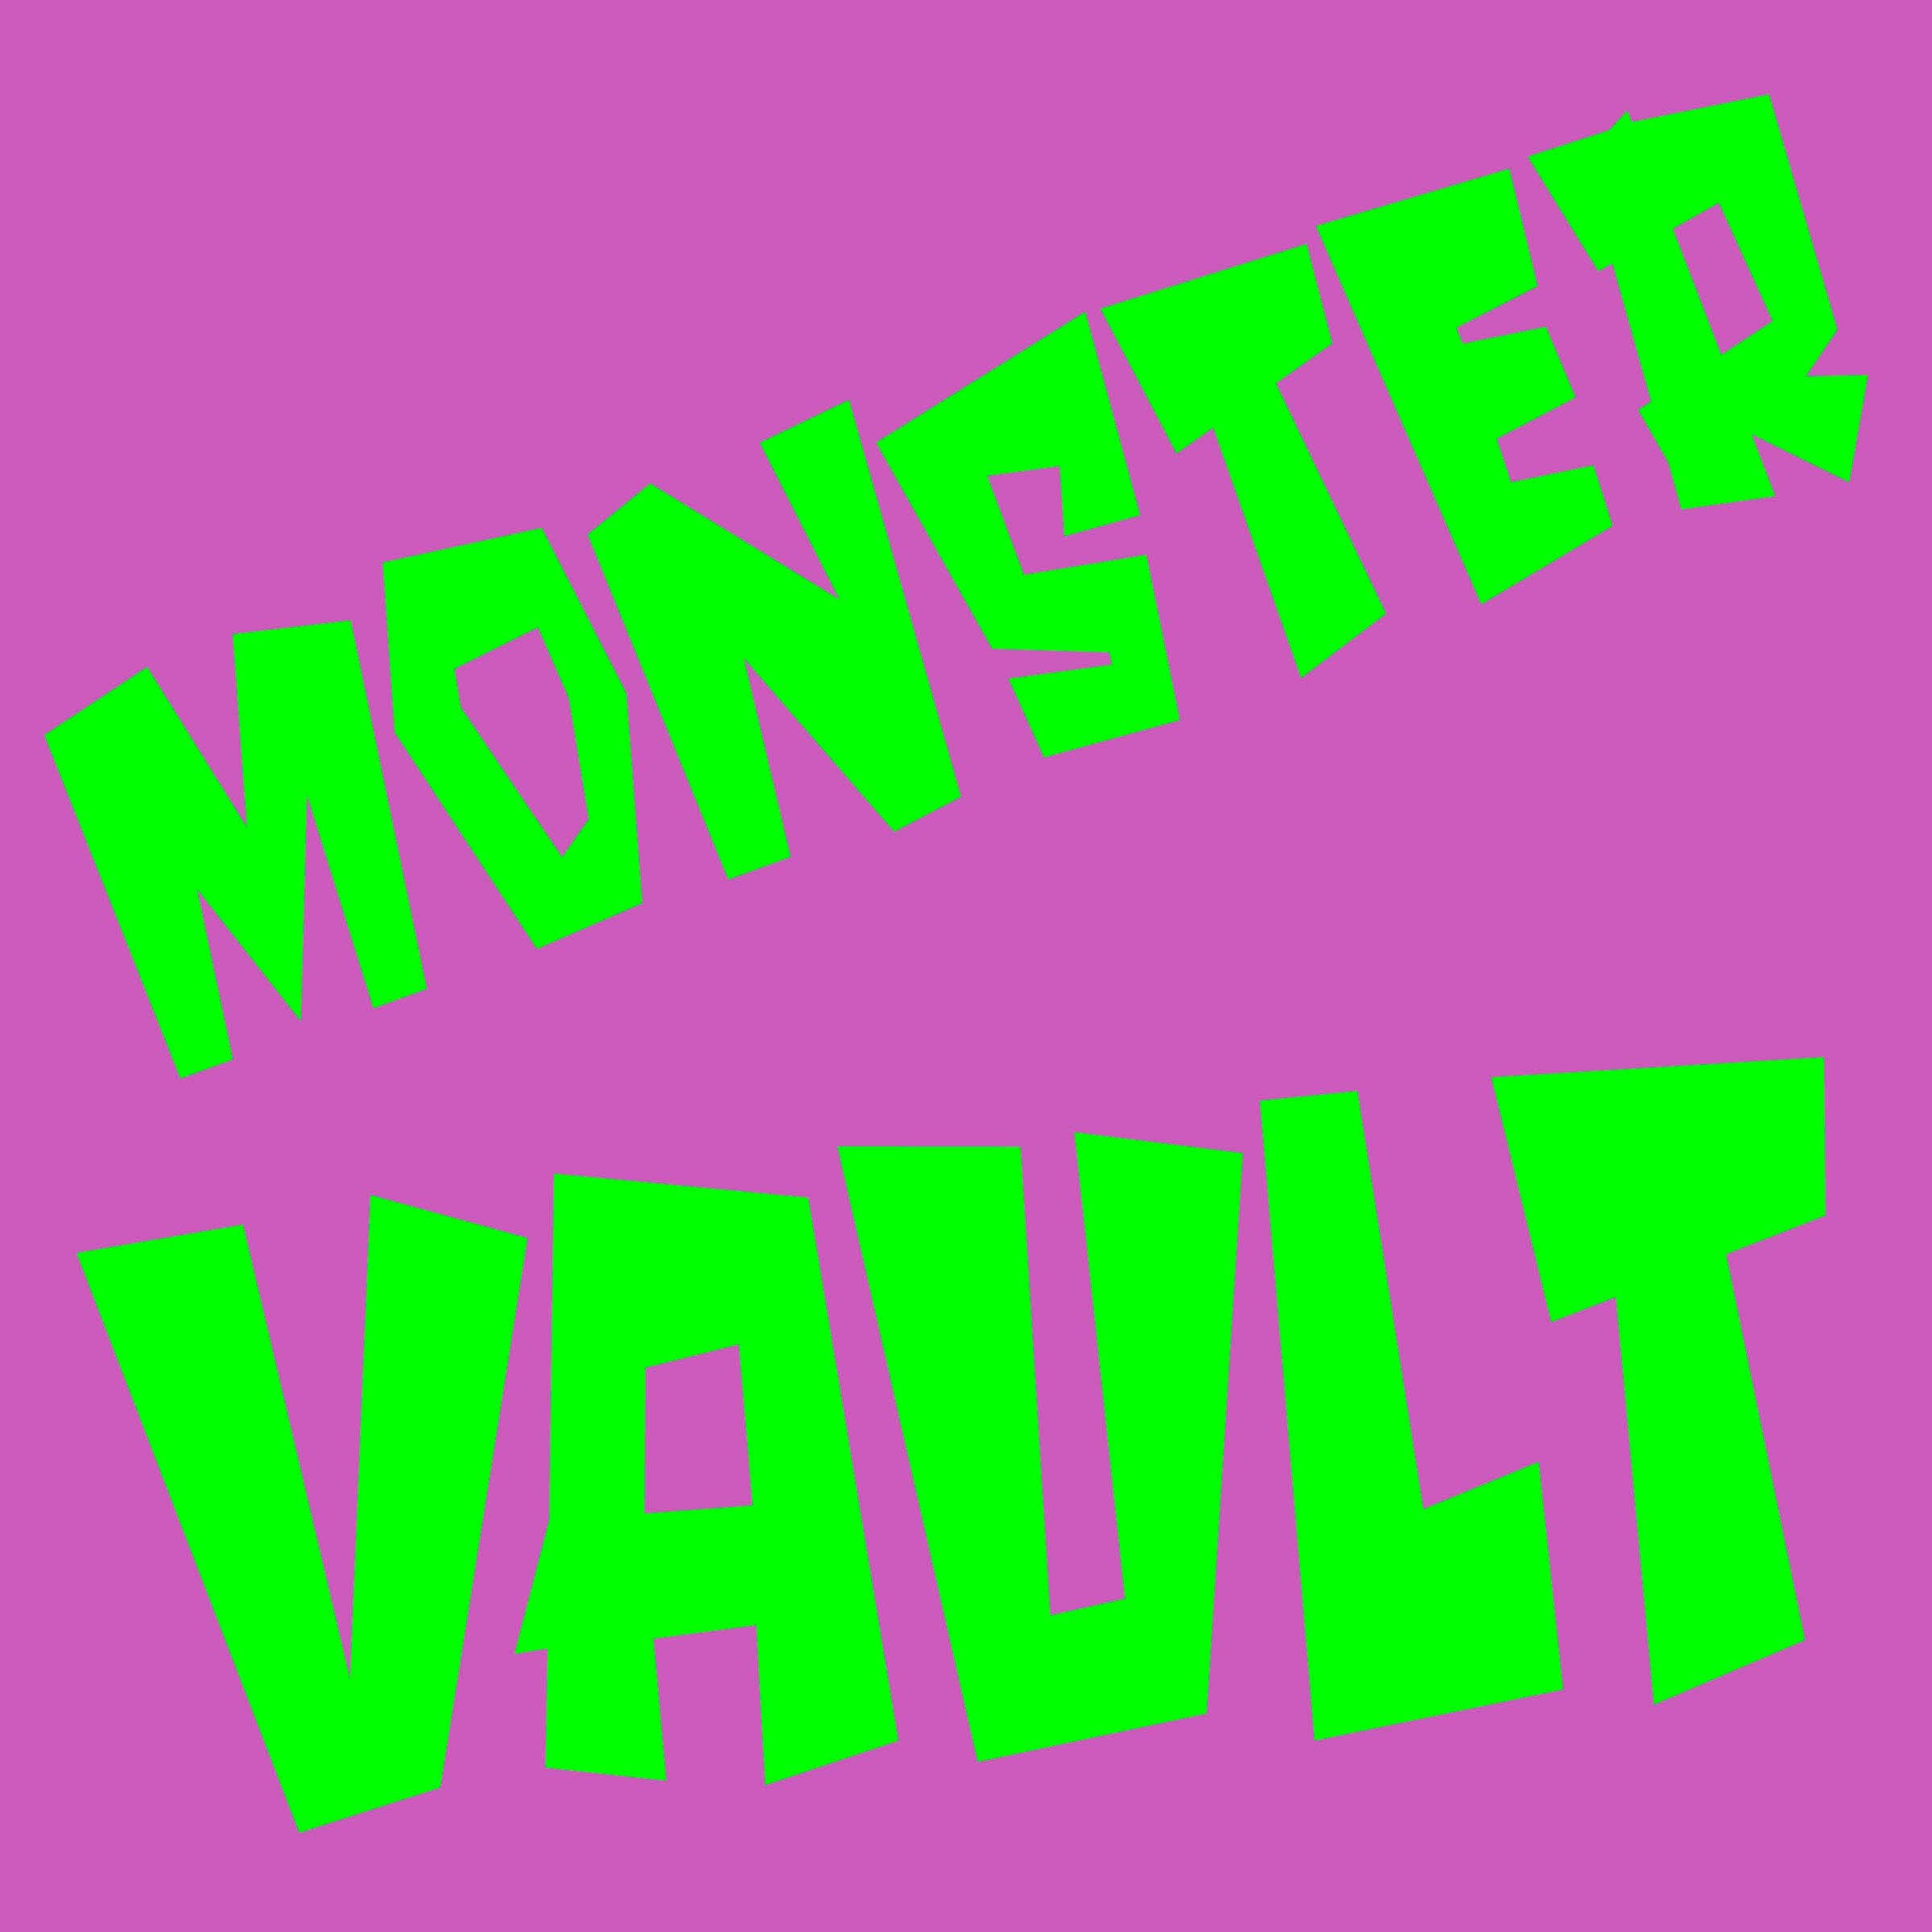 The new Spooky Room podcast "Monster Vault" has launched